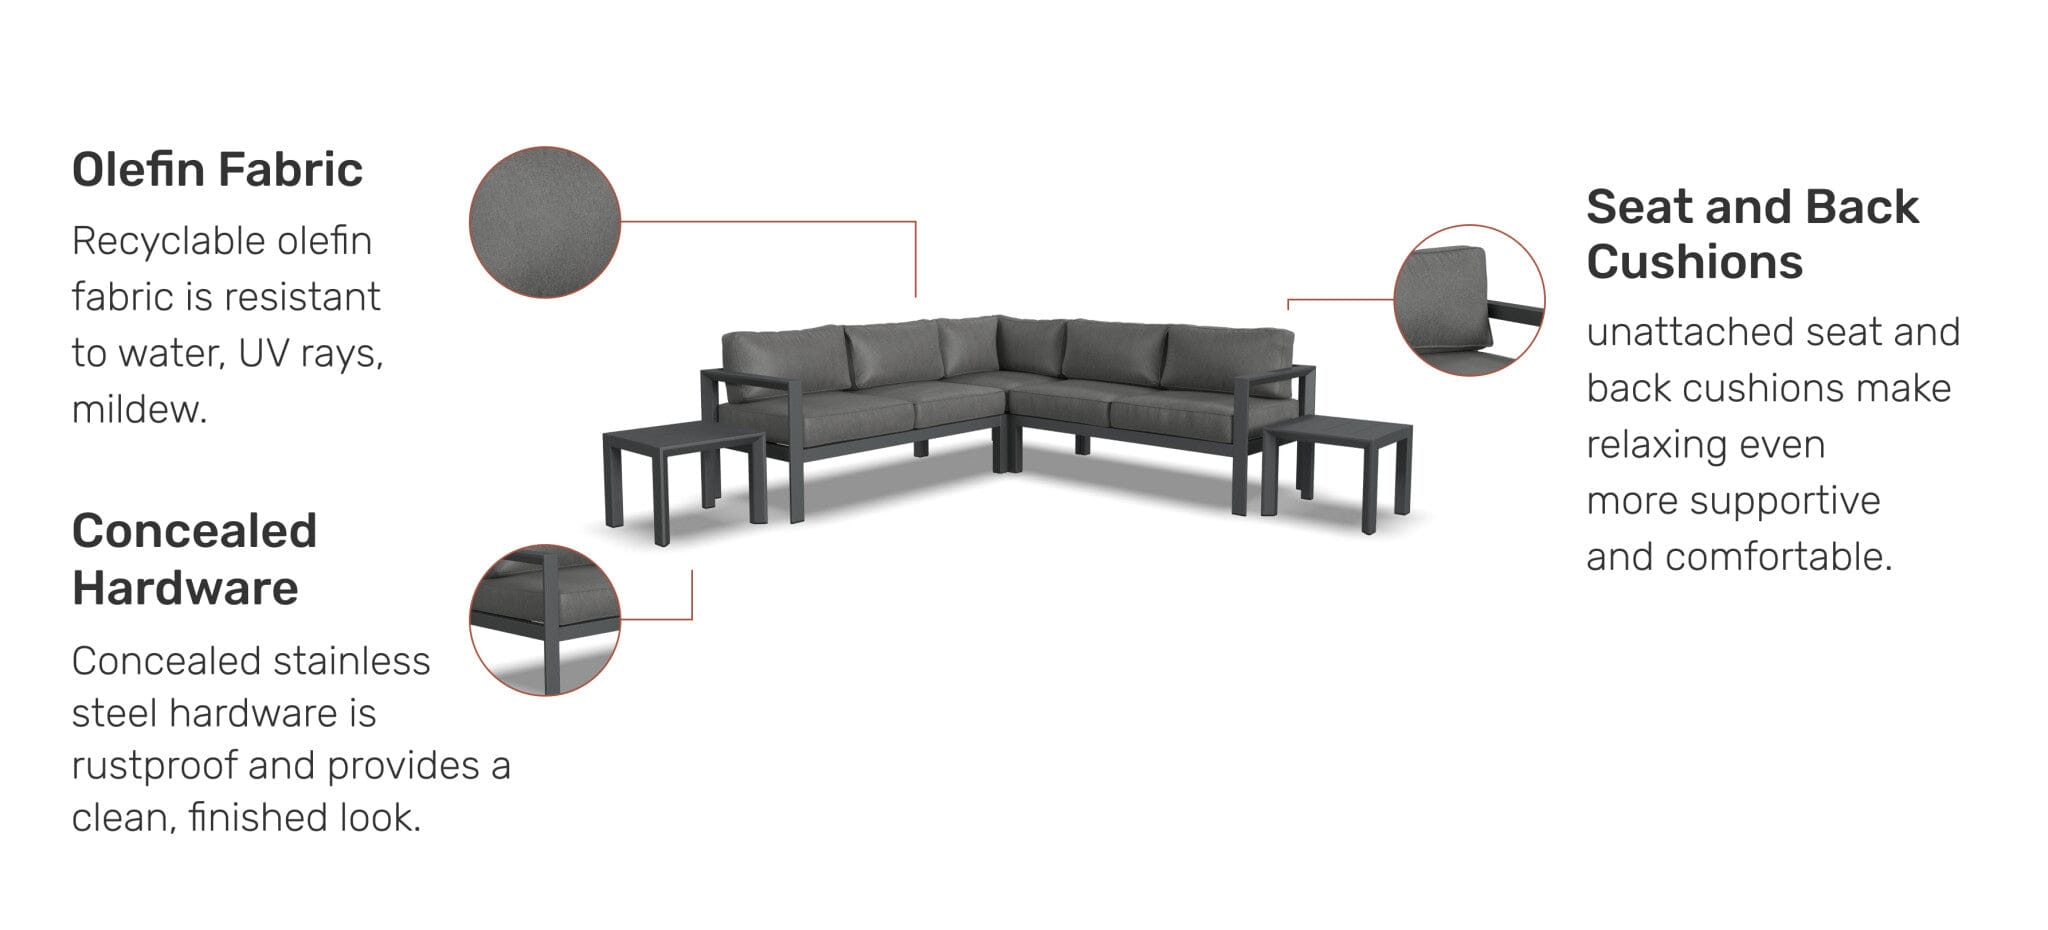 Modern & Contemporary 5 Seat Sectional with 2 End Tables By Grayton Outdoor Seating Grayton